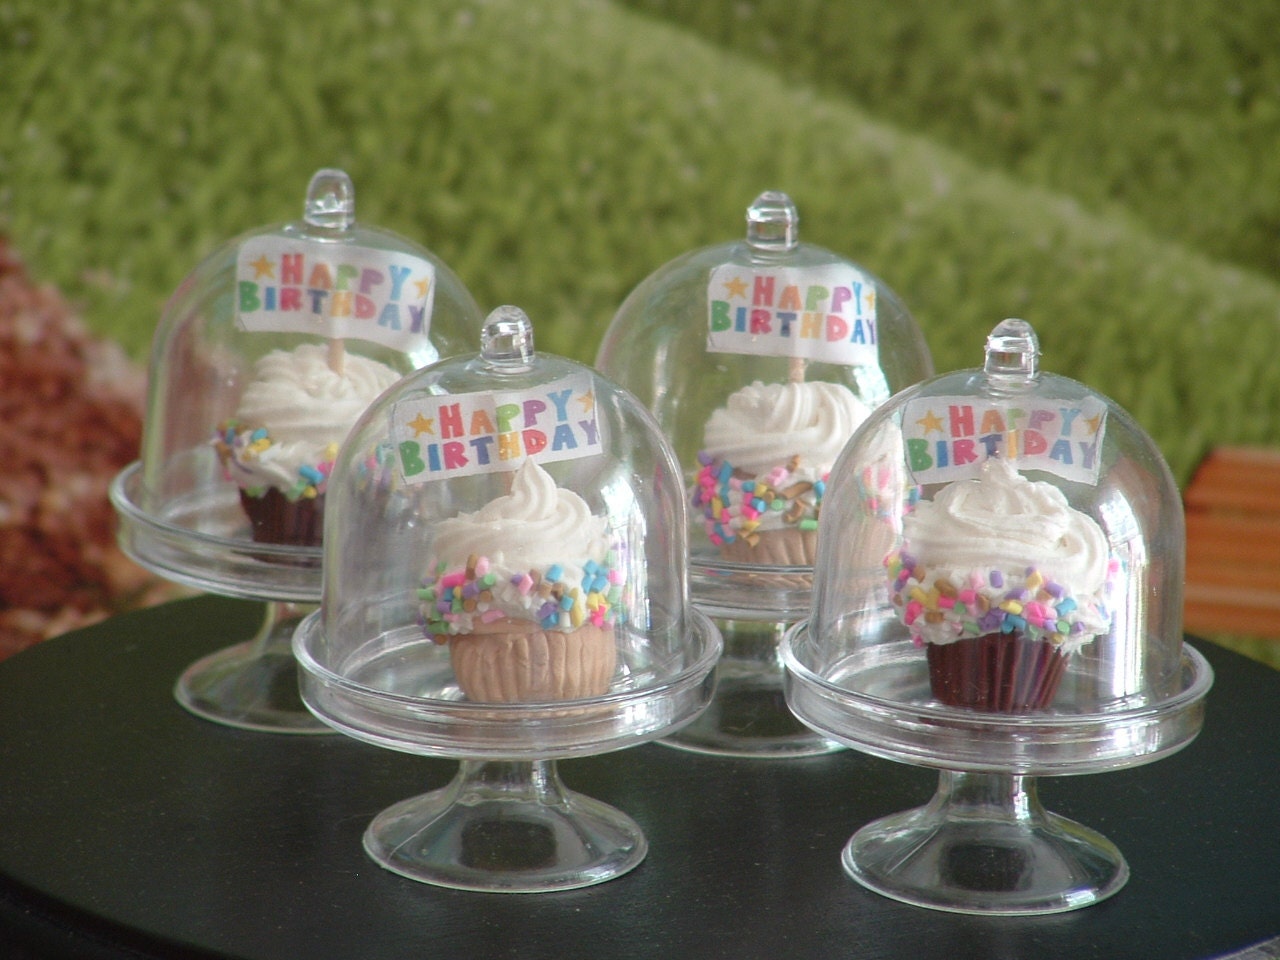 Happy Birthday Cupcakes in Domed Dish for American Girl Dolls 